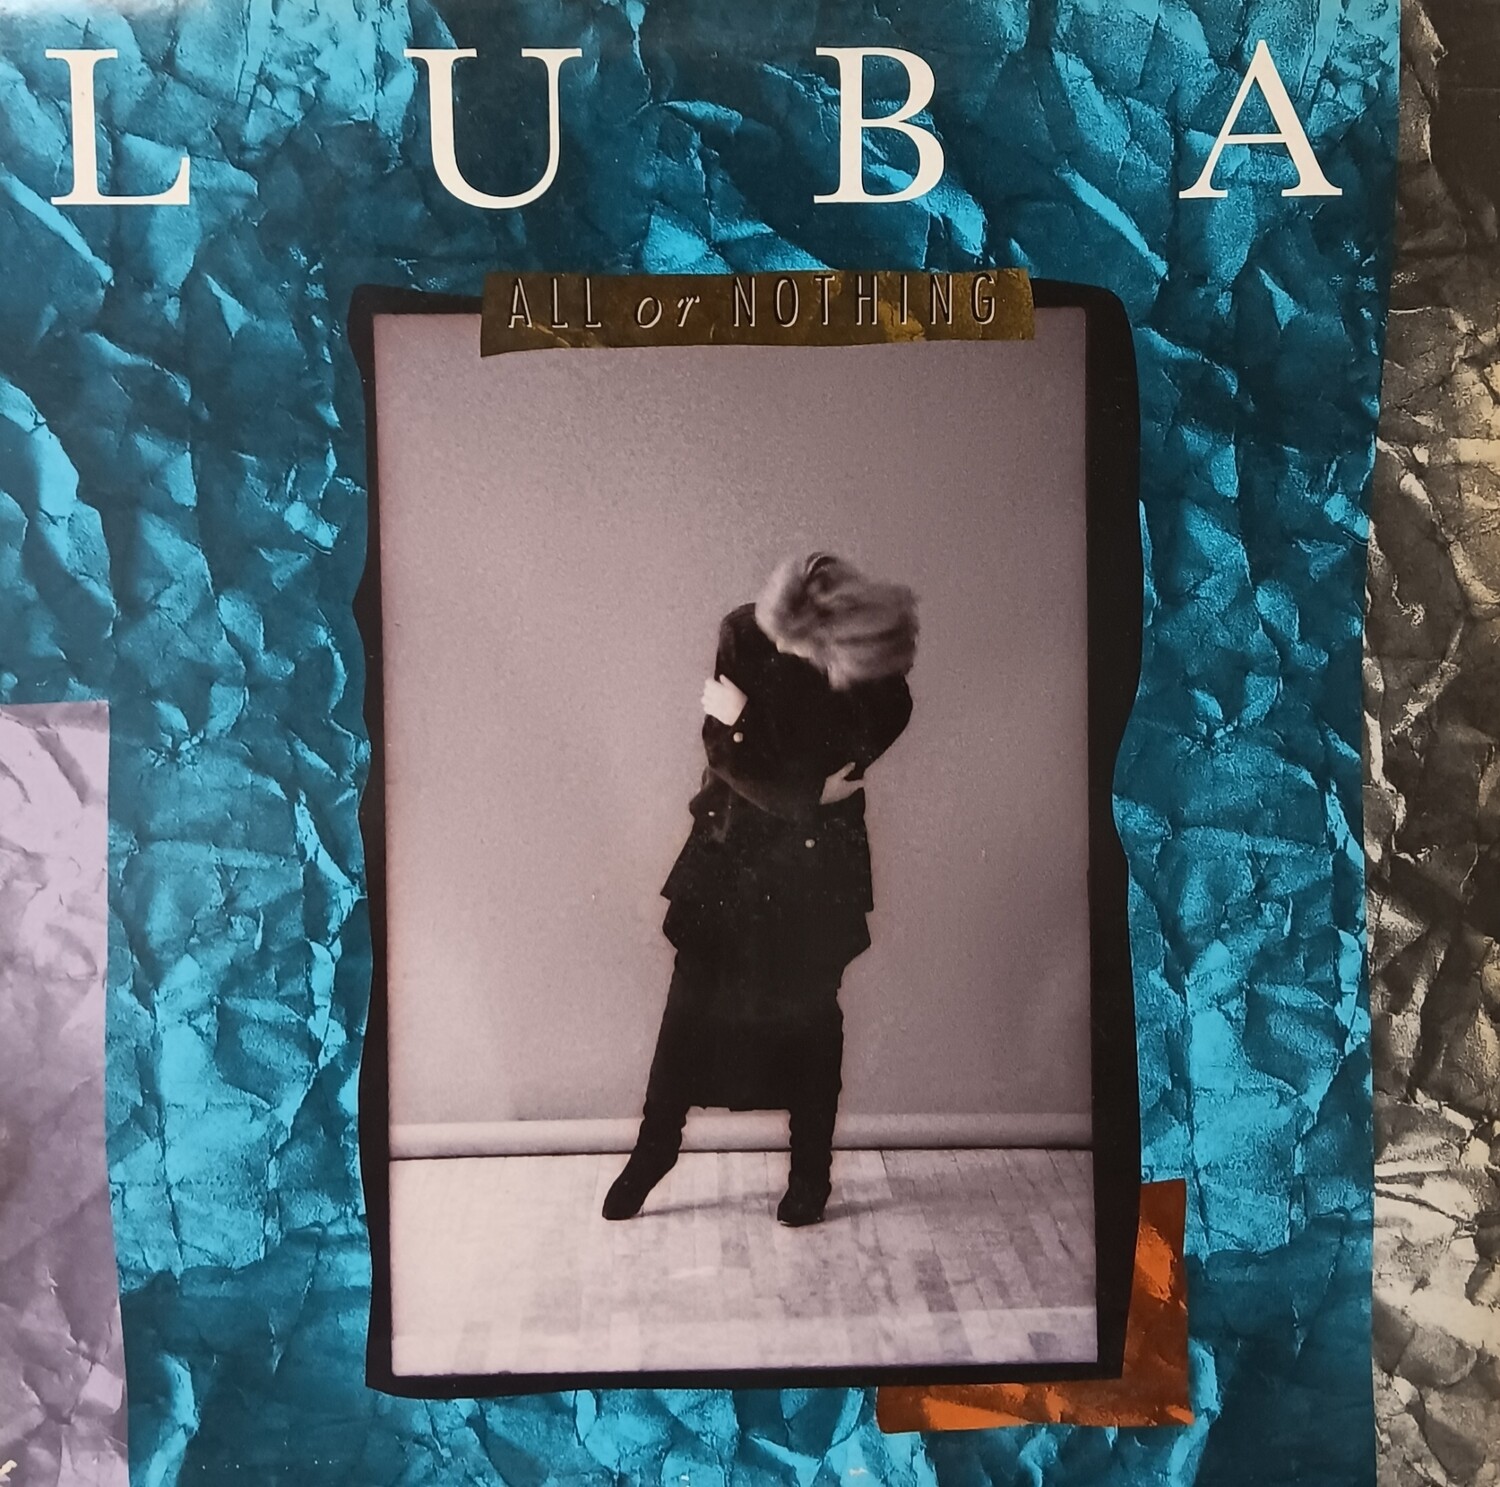 Luba - All or nothing